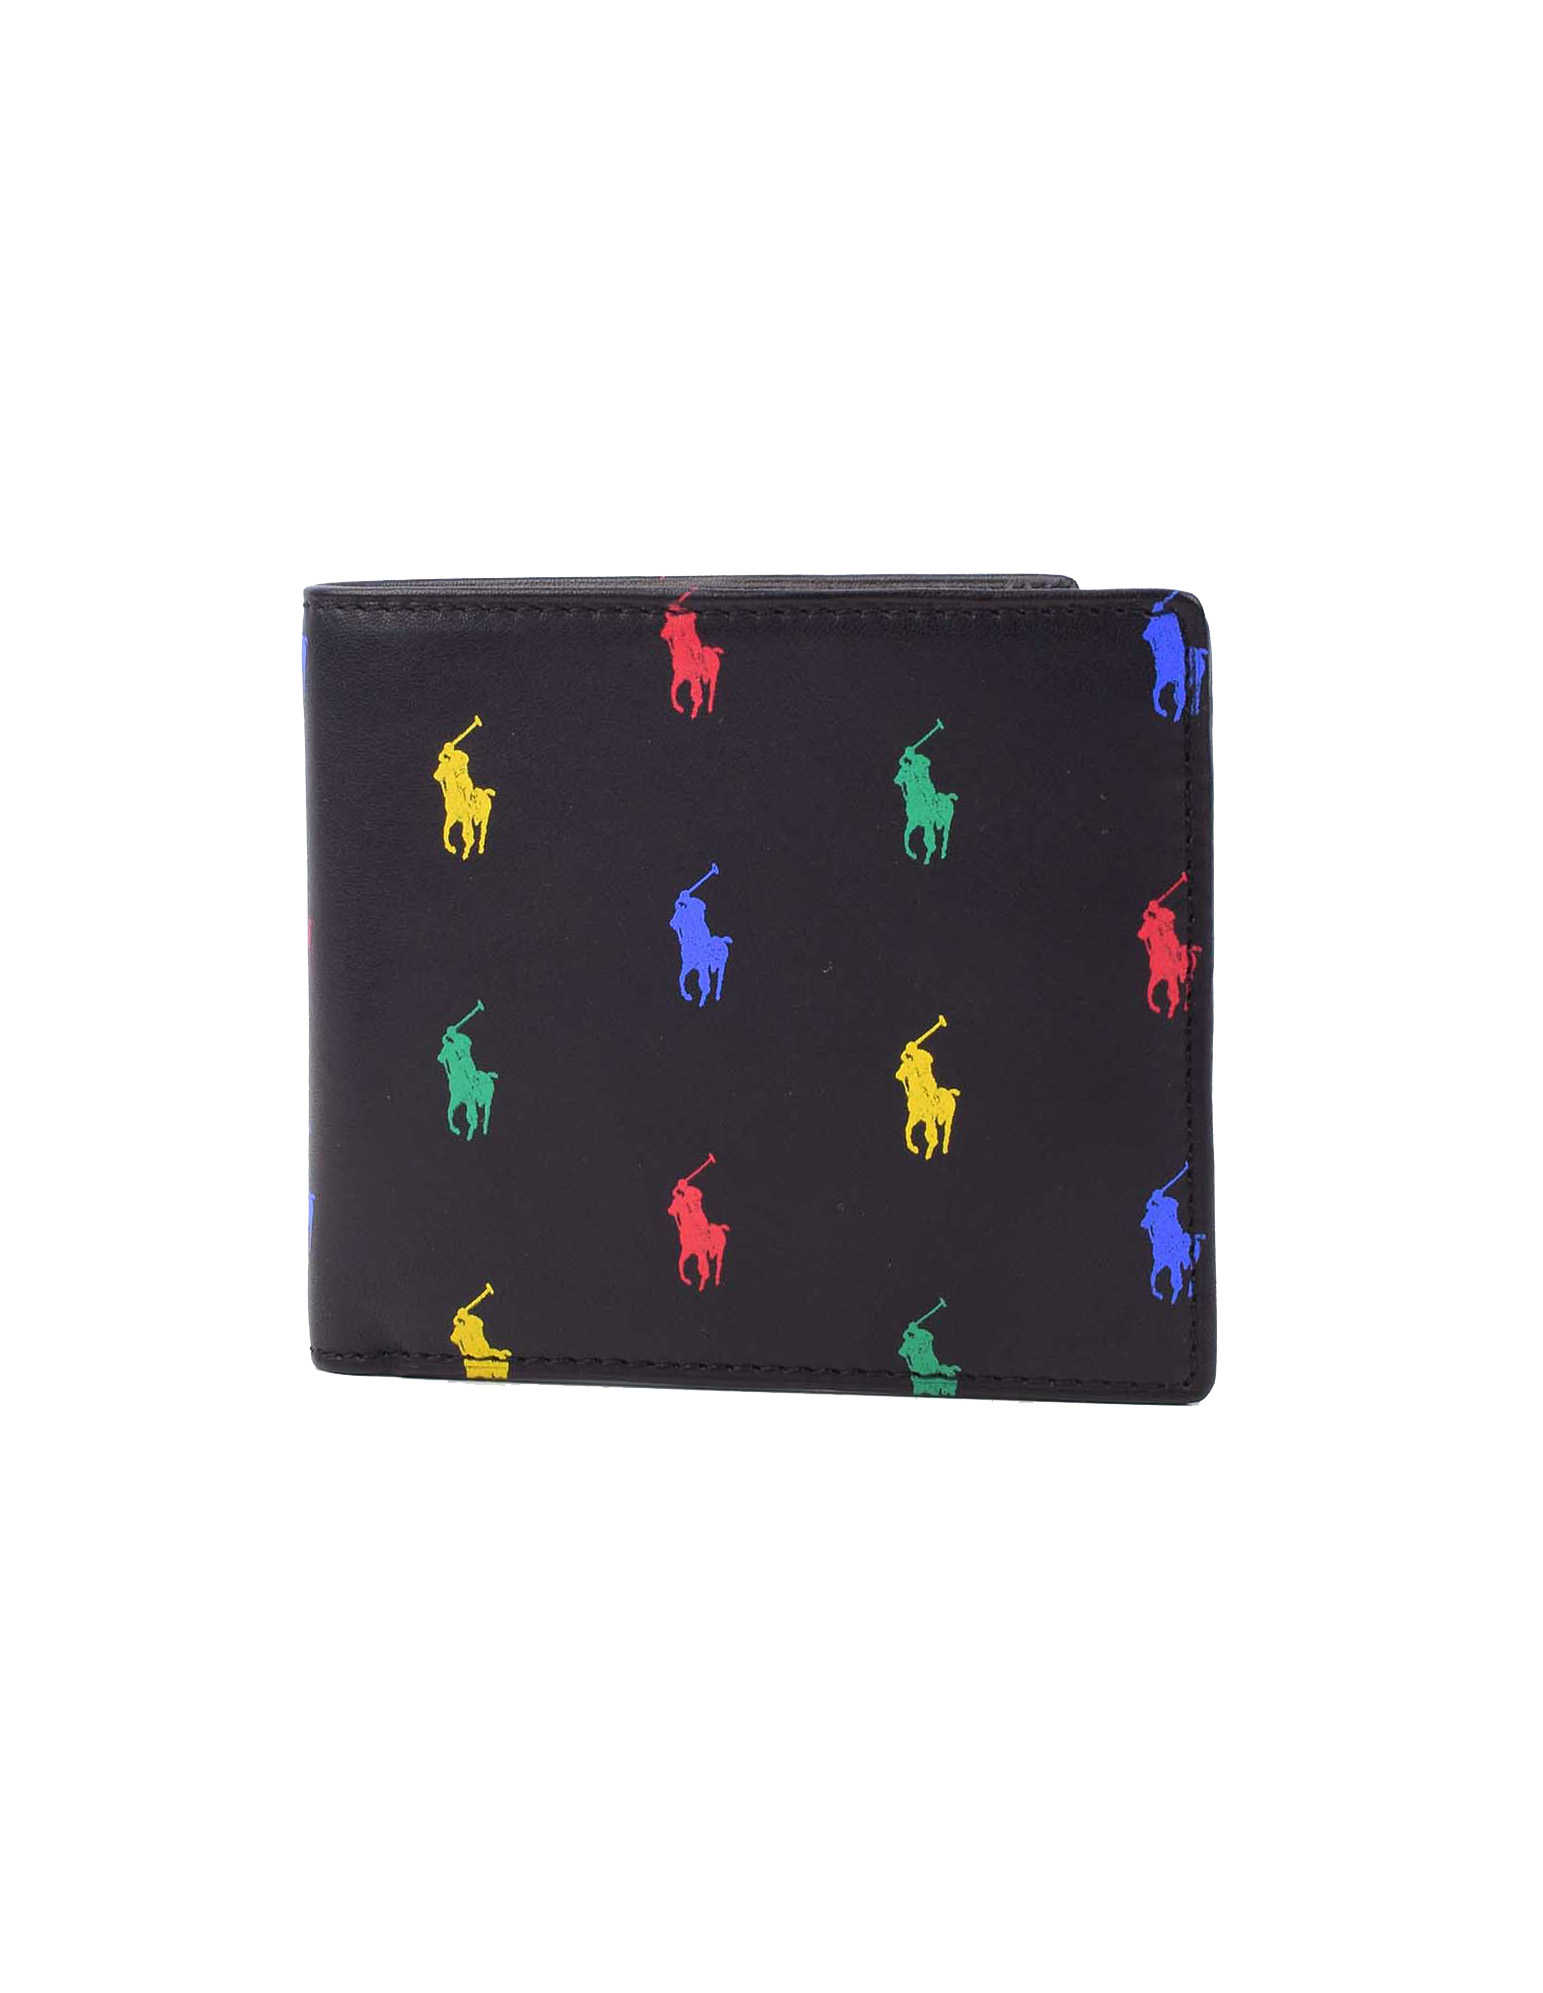 POLO RALPH LAUREN MULTI PP BF-WALLET-SMOOTH LEATHER 